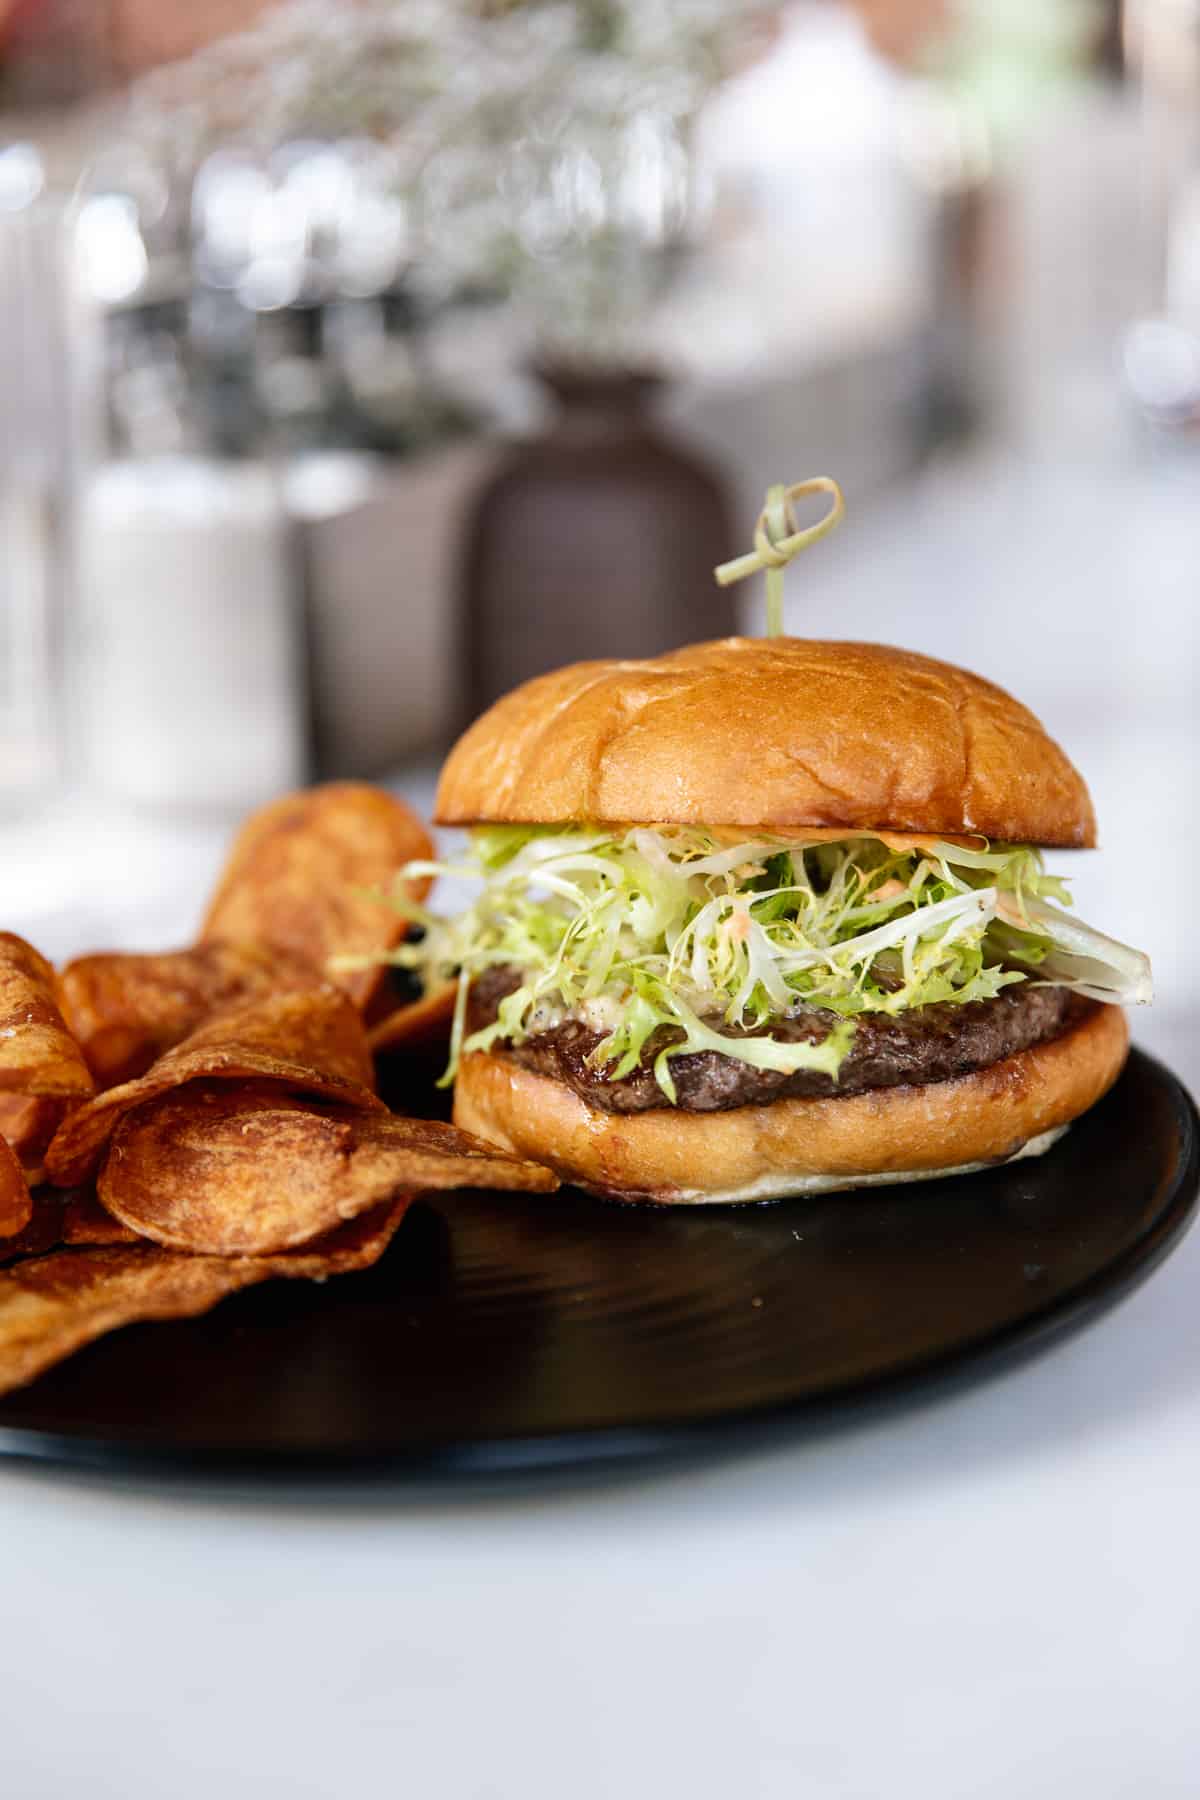 Best burgers in Denver: Local bear beef by Death & Co.